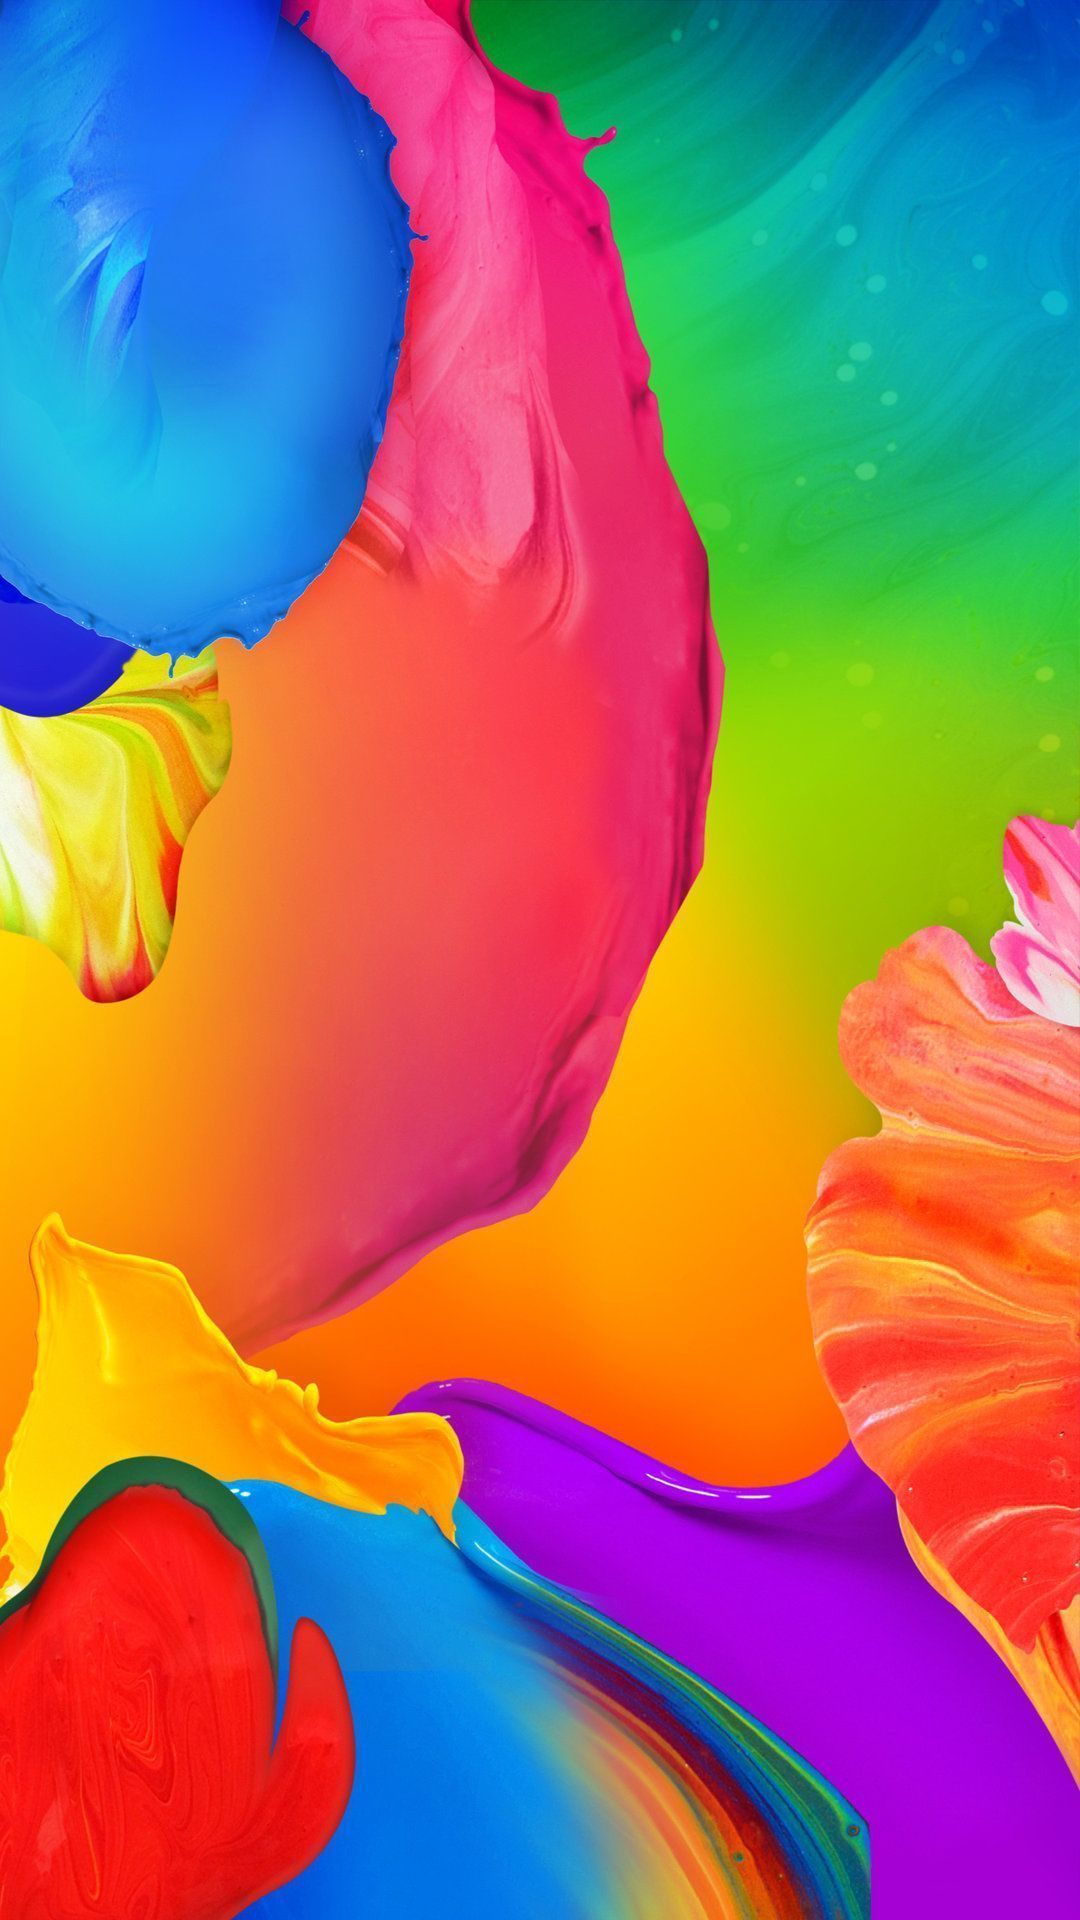 Awesome 8 Colorful Wallpaper HD Resolution For Your Android or iPhone Wallpaper #android #iphone #wallpaper. Painting wallpaper, Colorful wallpaper, Abstract